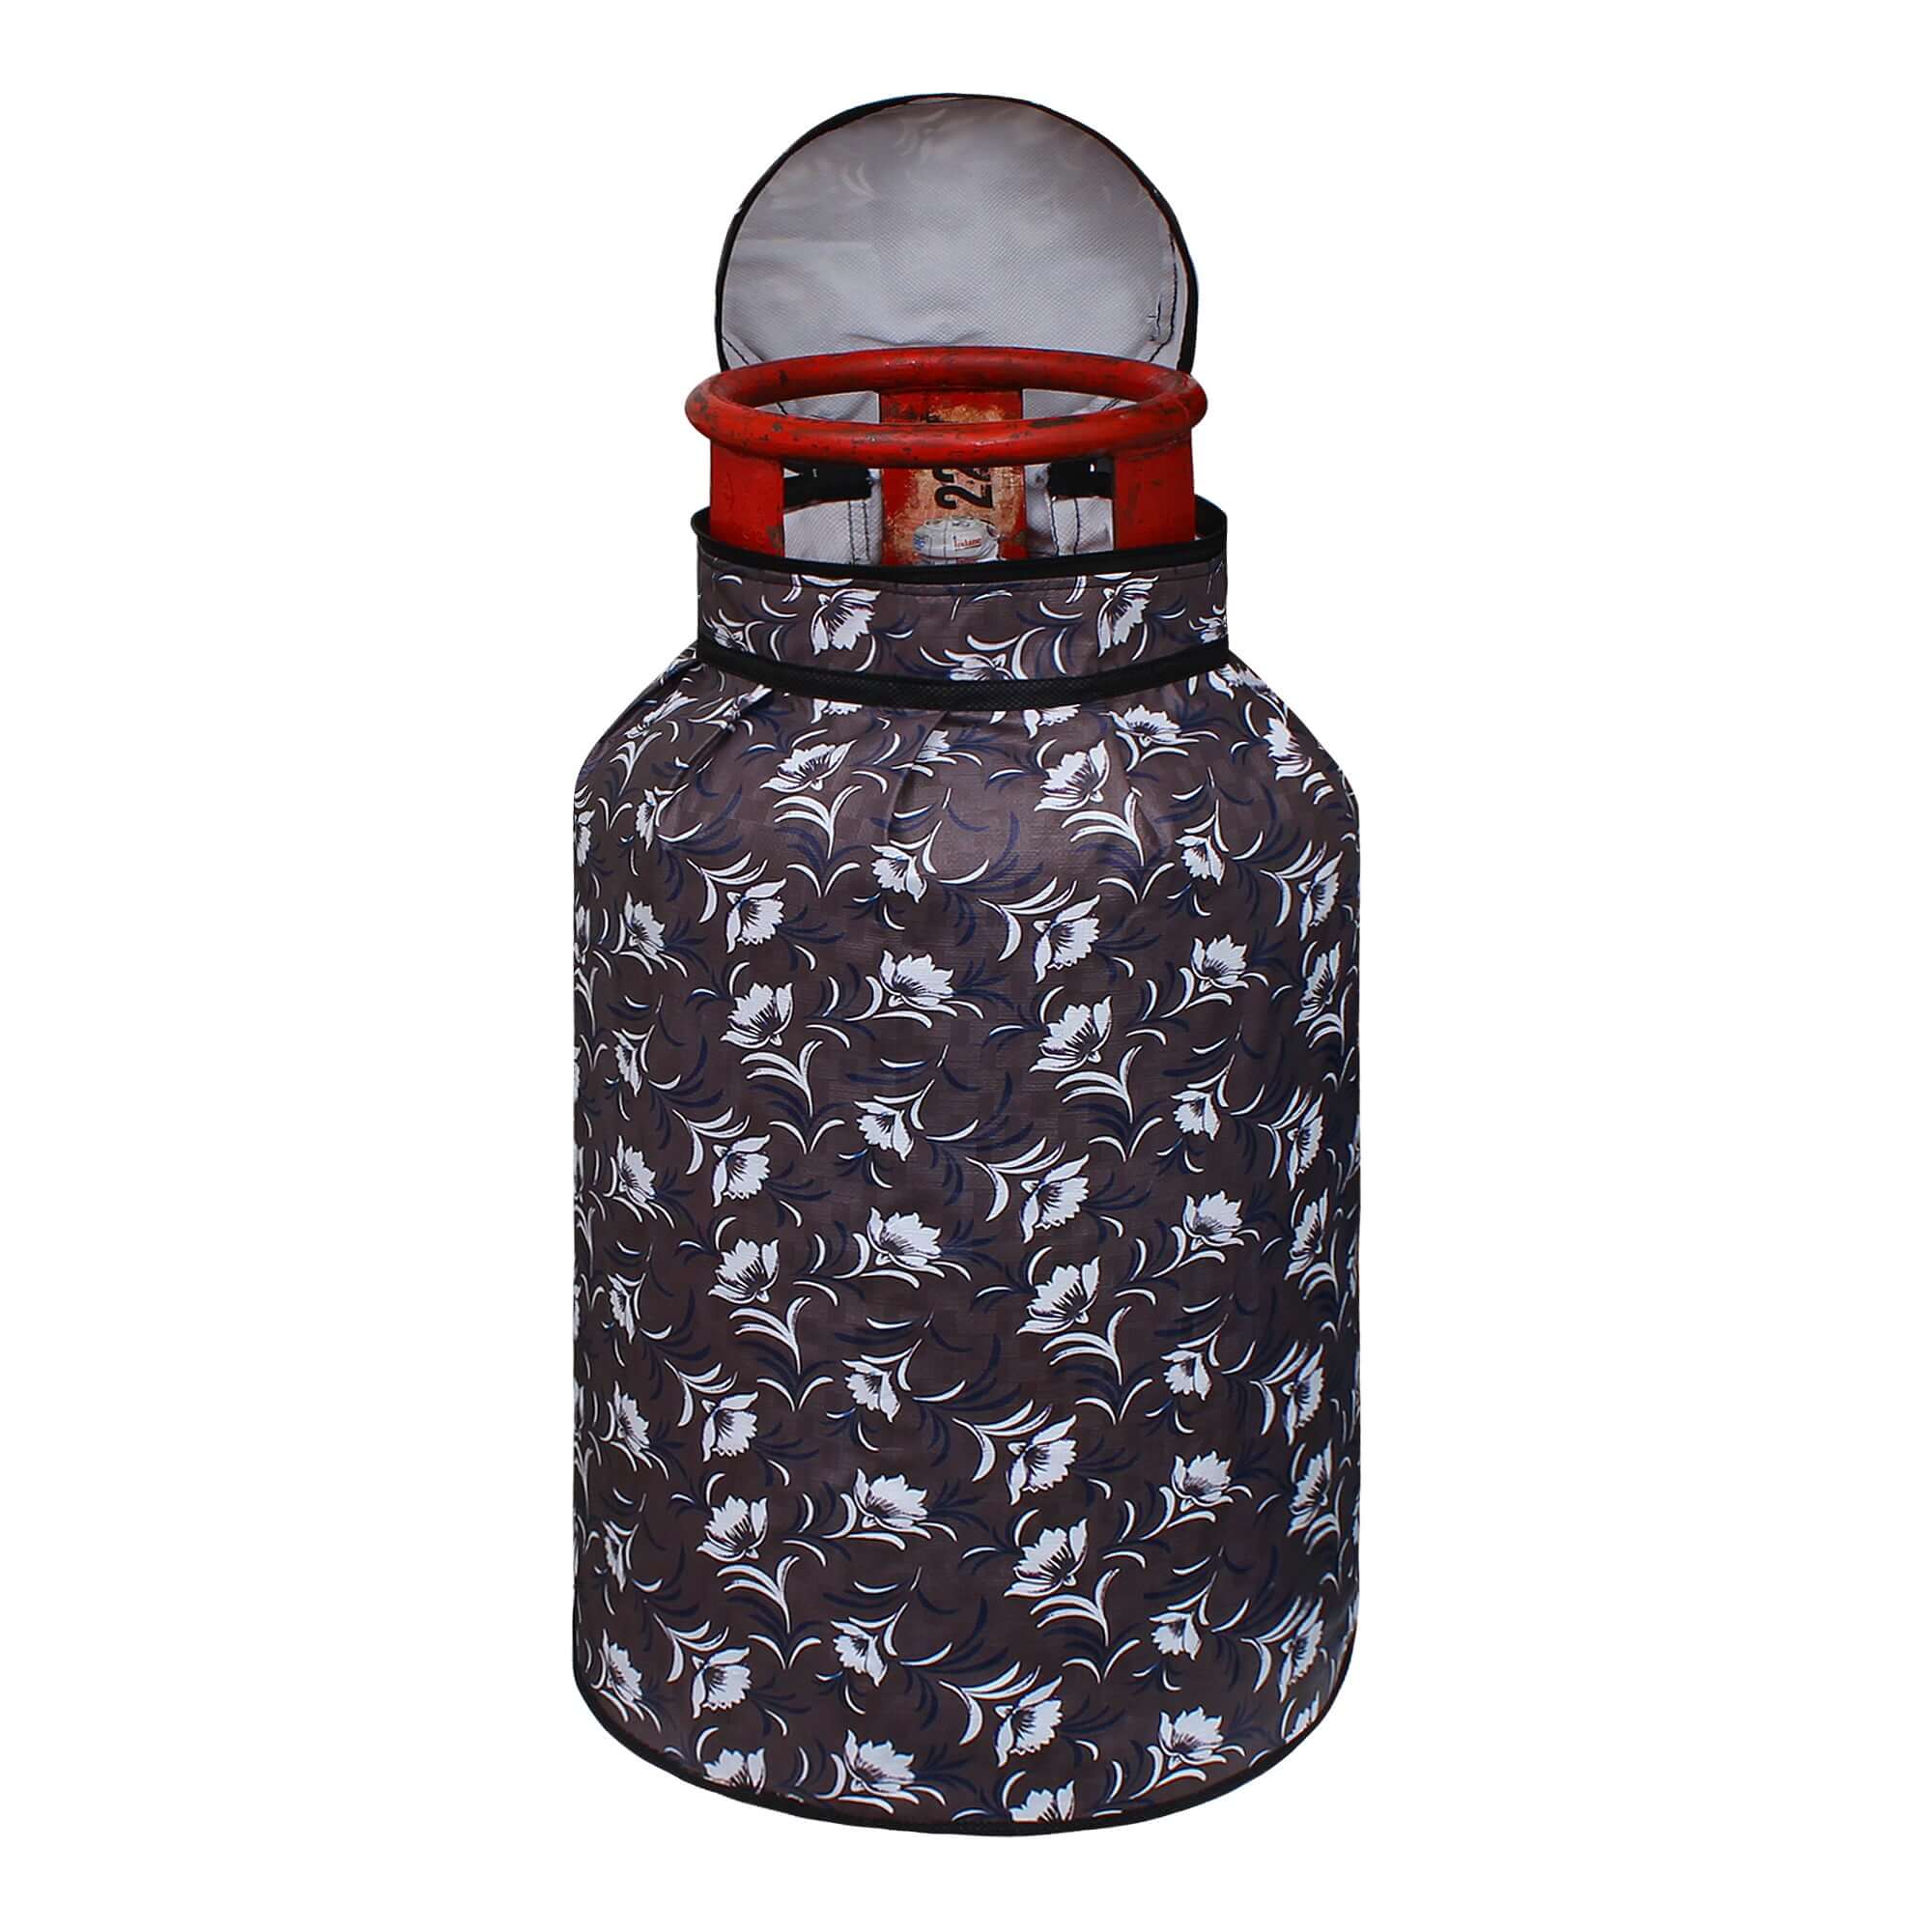 LPG Gas Cylinder Cover, SA05 - Dream Care Furnishings Private Limited